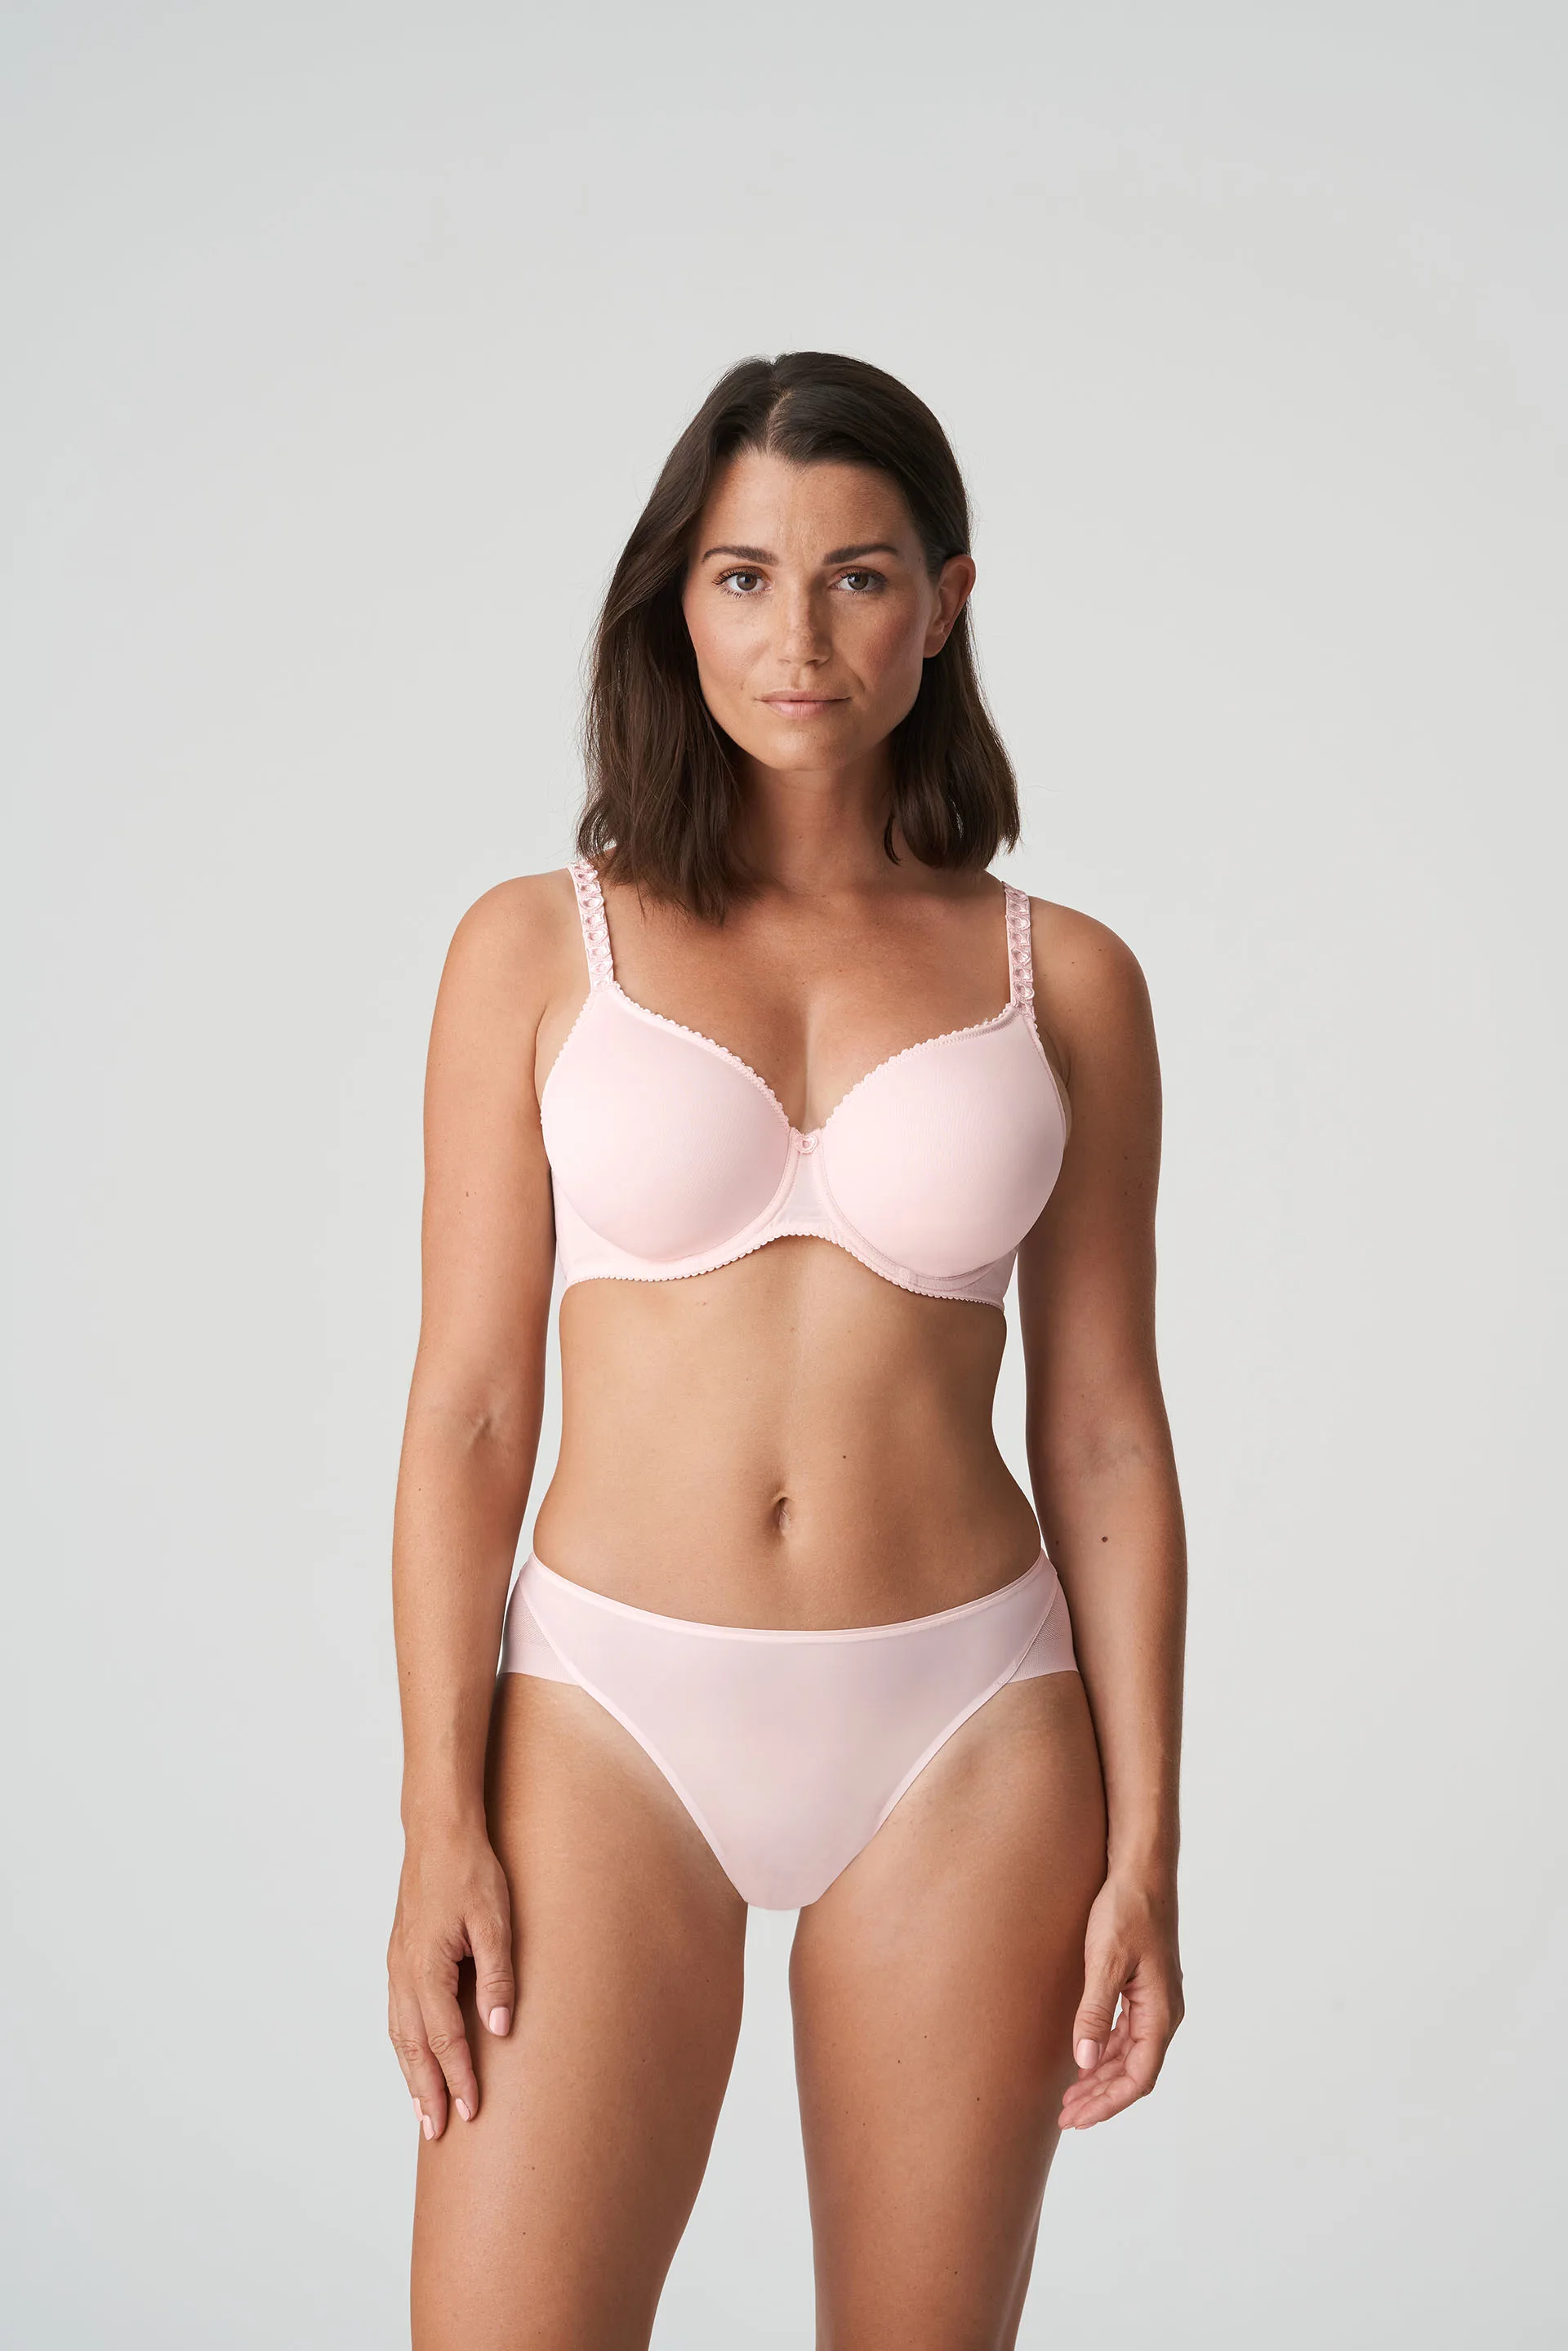 PrimaDonna EVERY WOMAN pink blush spacer full cup bra